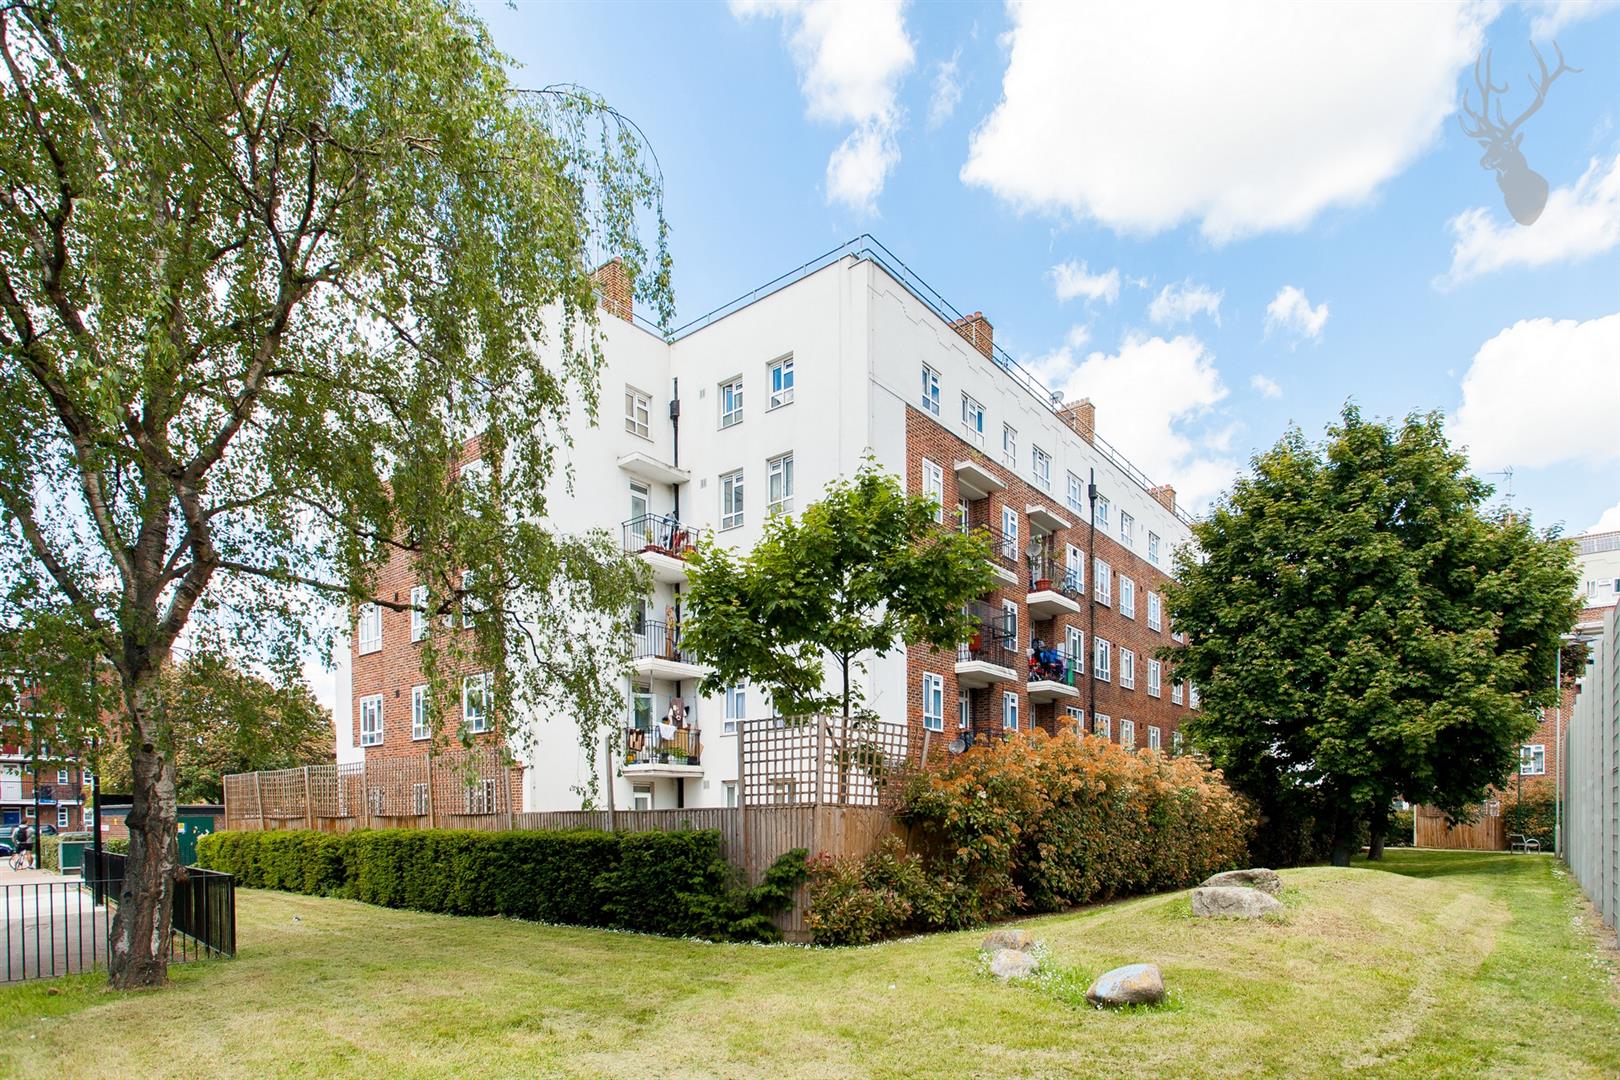 Similar Property: Flat in Bromley by bow